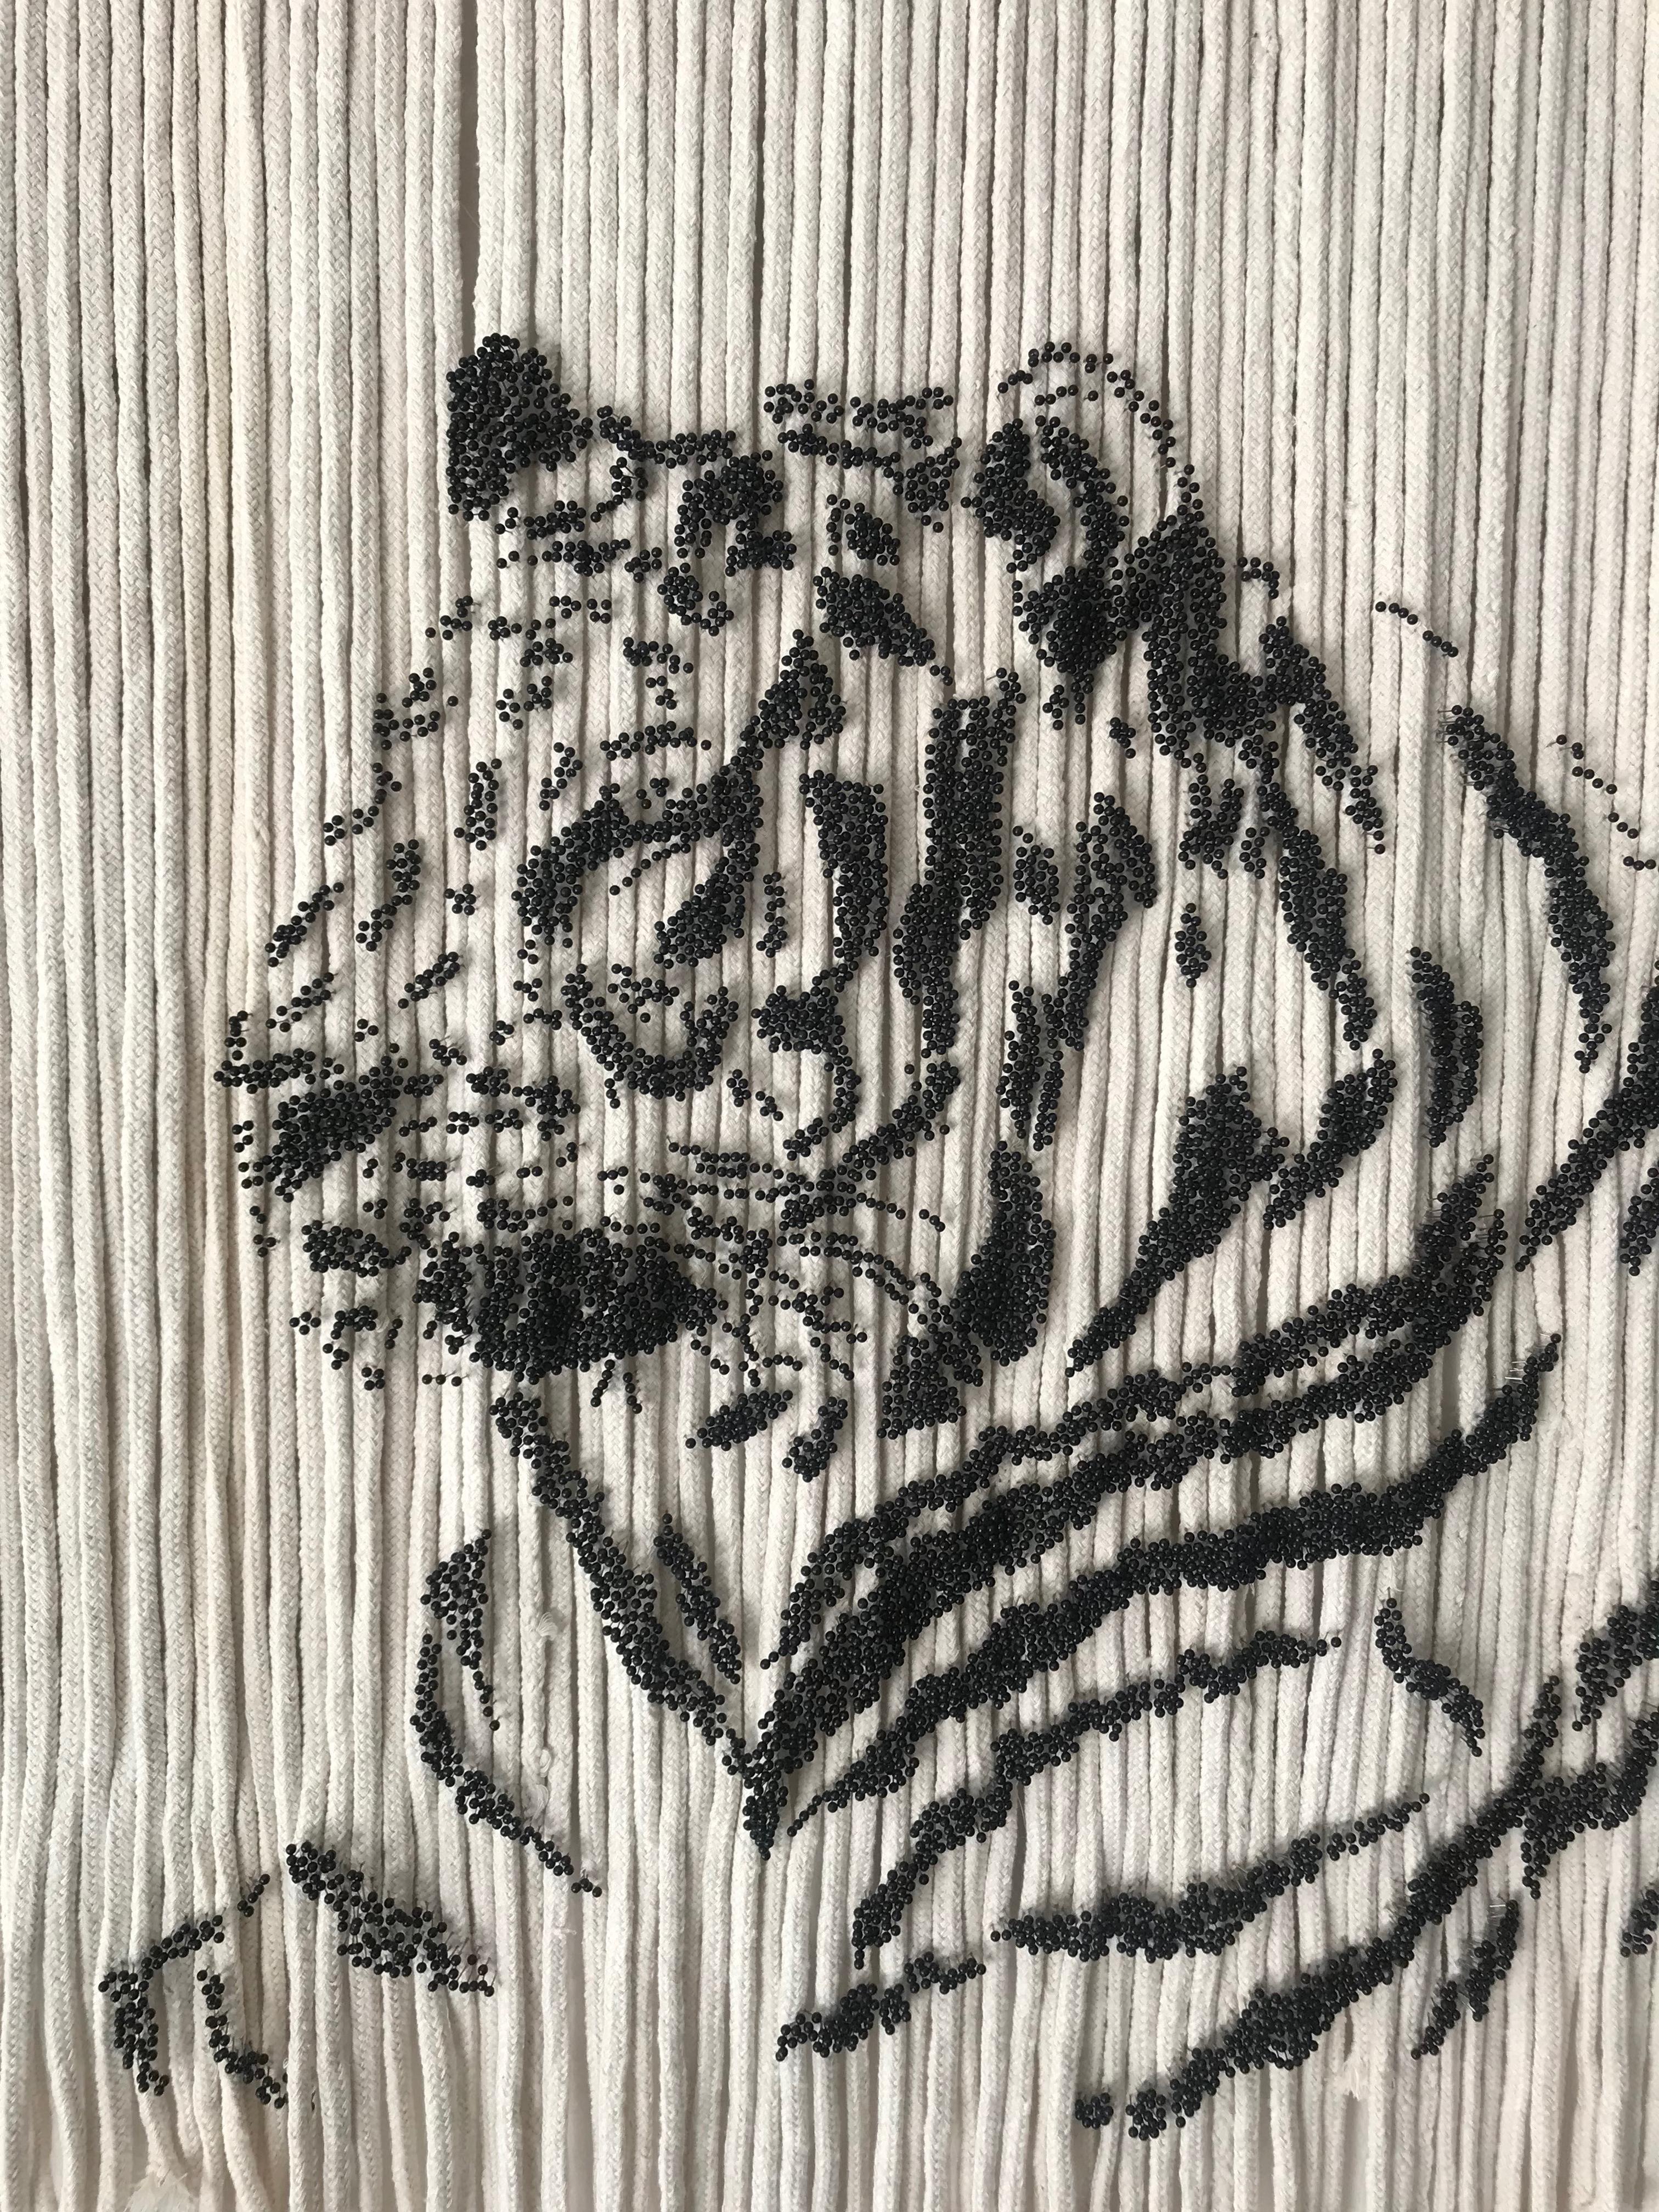 TIGER  Modern Animal Wall Art Sculpture For Hanging on Walls or Cieling - Gray Still-Life Sculpture by Arozarena De La Fuente